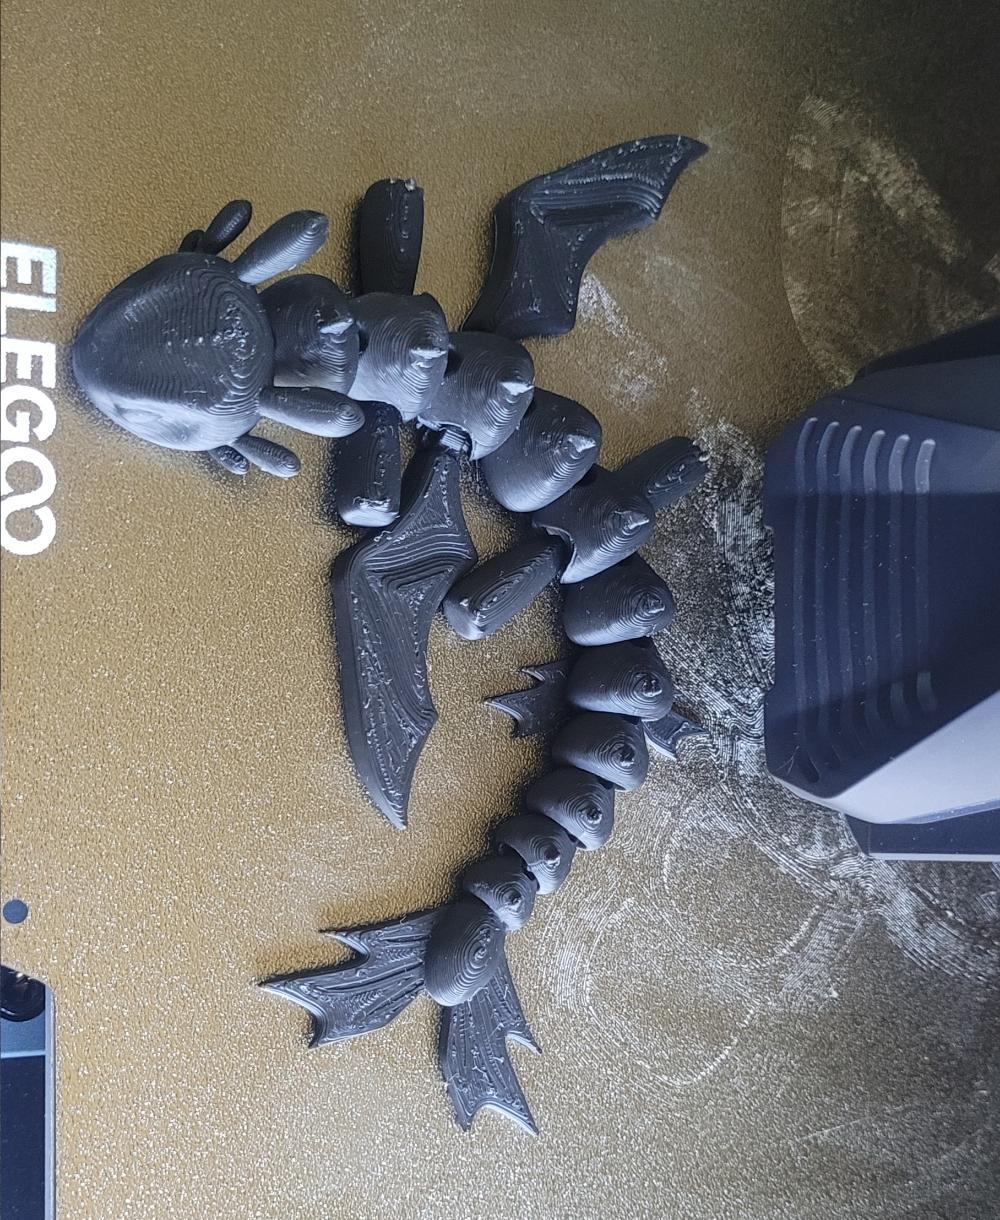 Articulated Toothless from How To Train Your Dragon 3d model